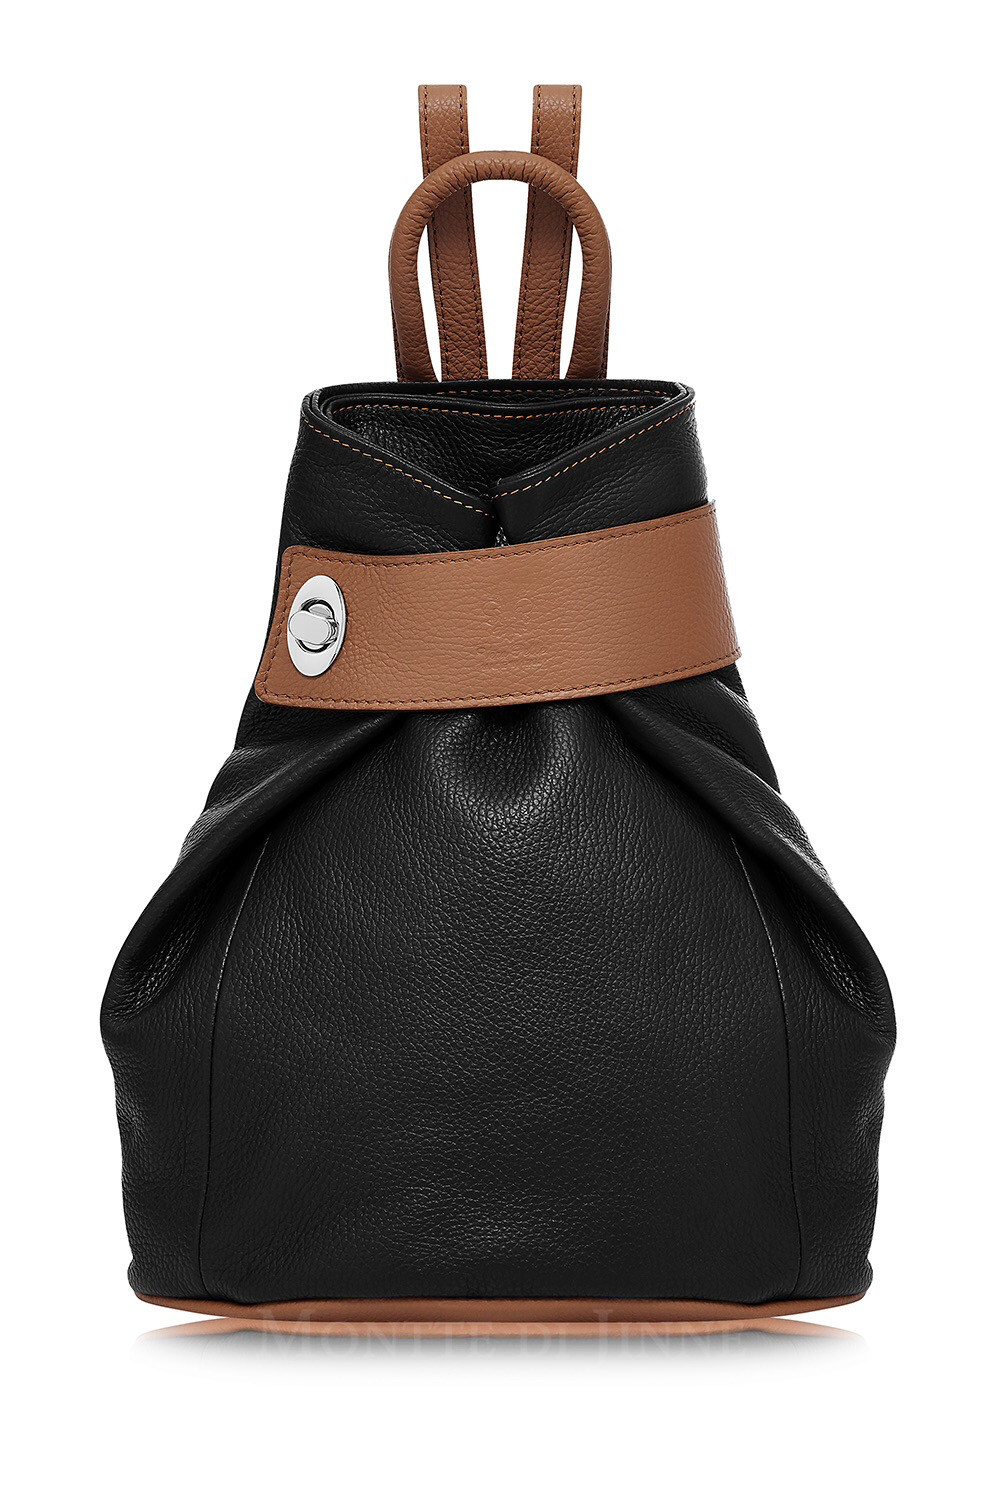 Black Body With Tan Trim Lock Backpack 